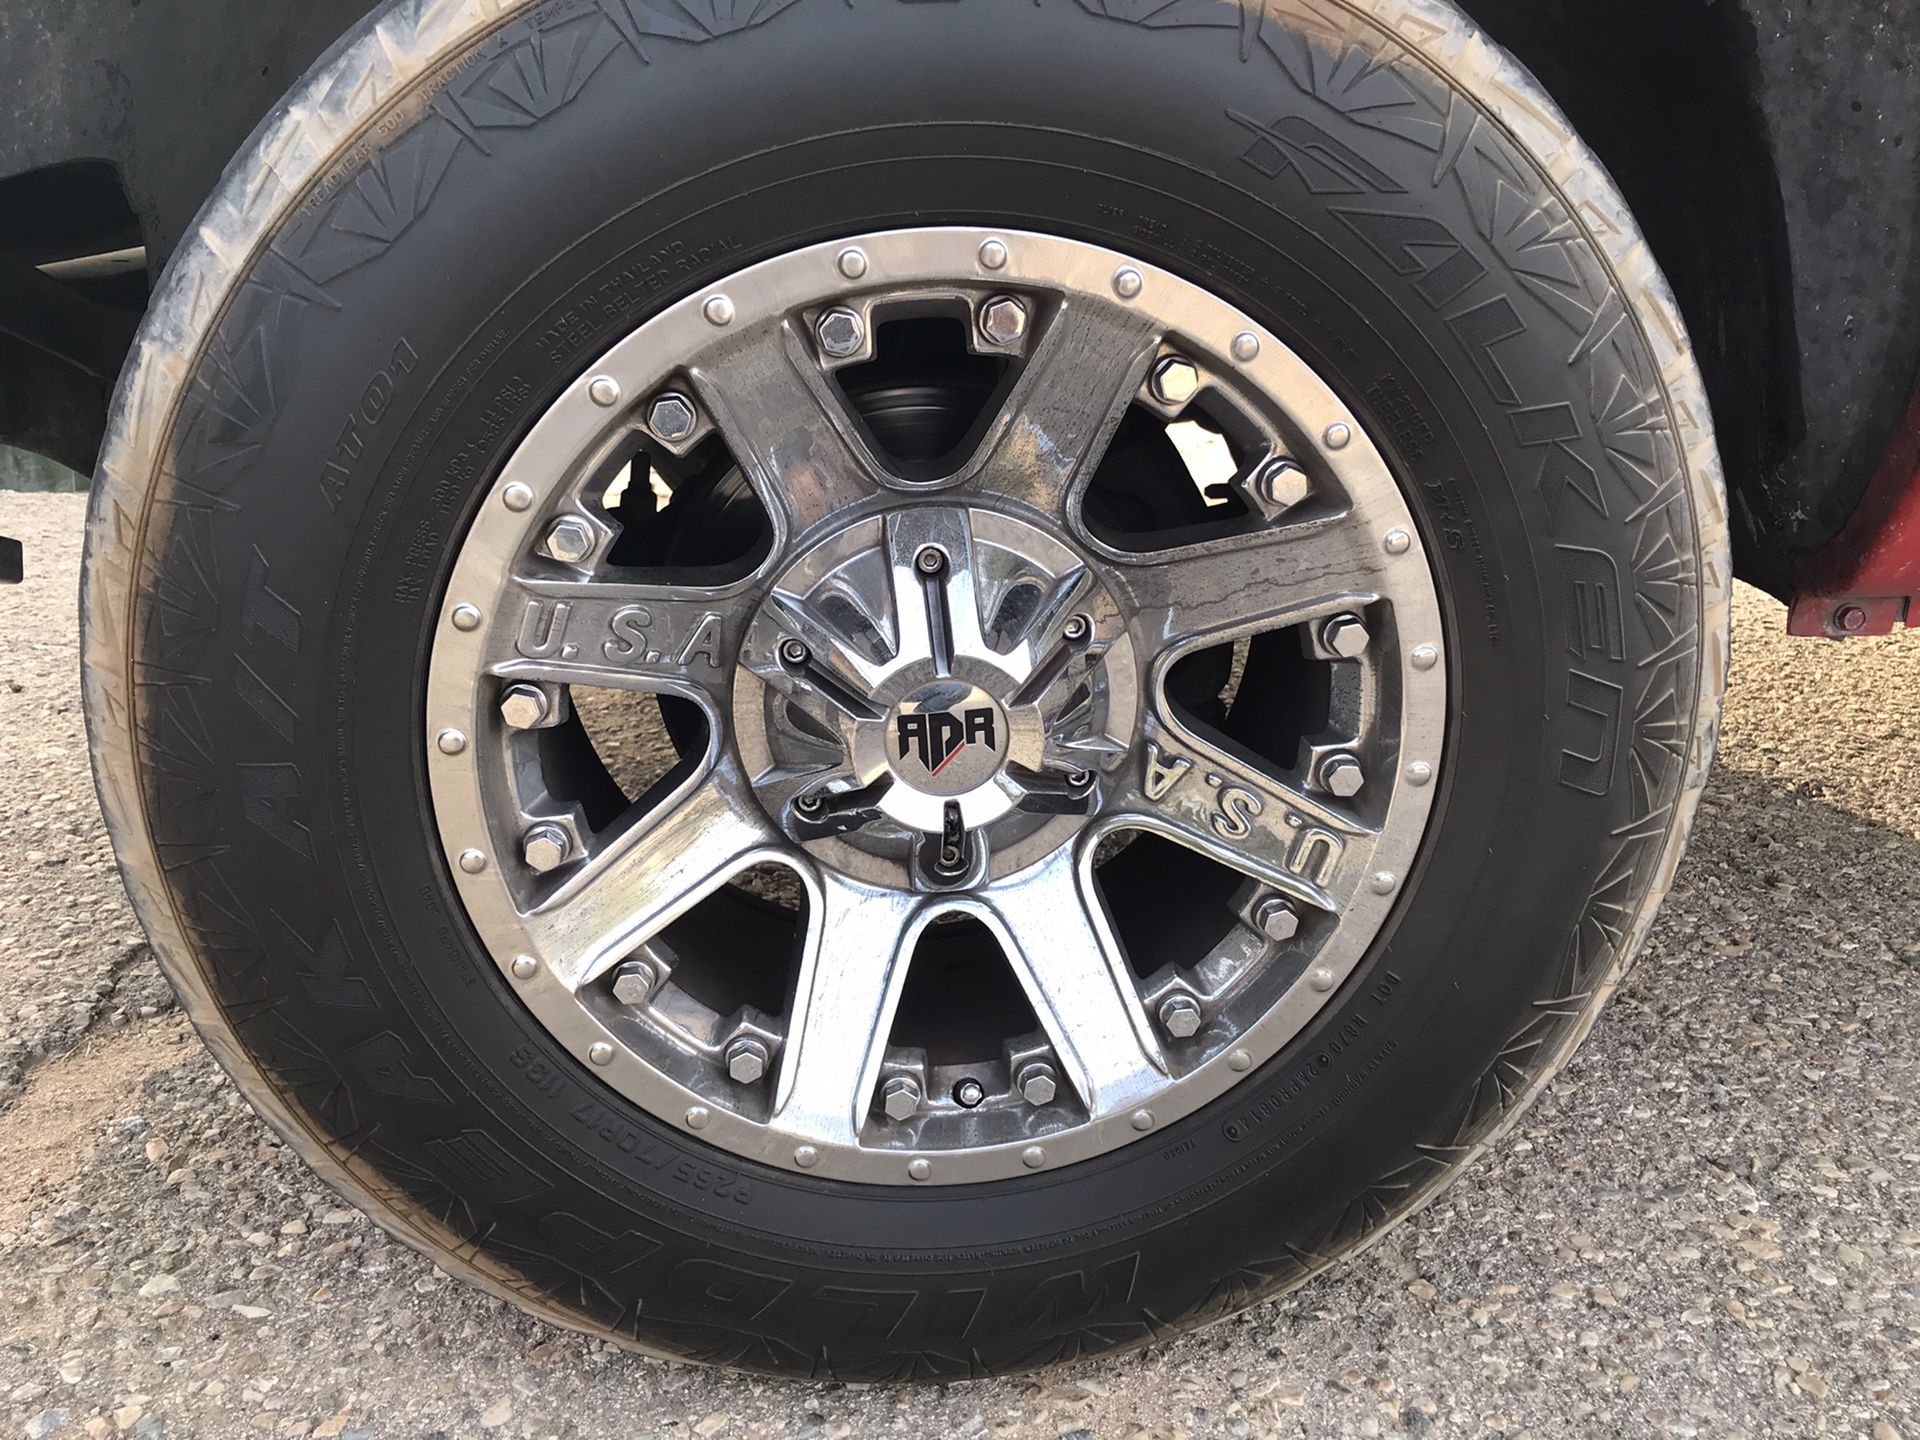 Rims for 01 Dodge Ram 1500. Looking to trade for factory or black wheels.